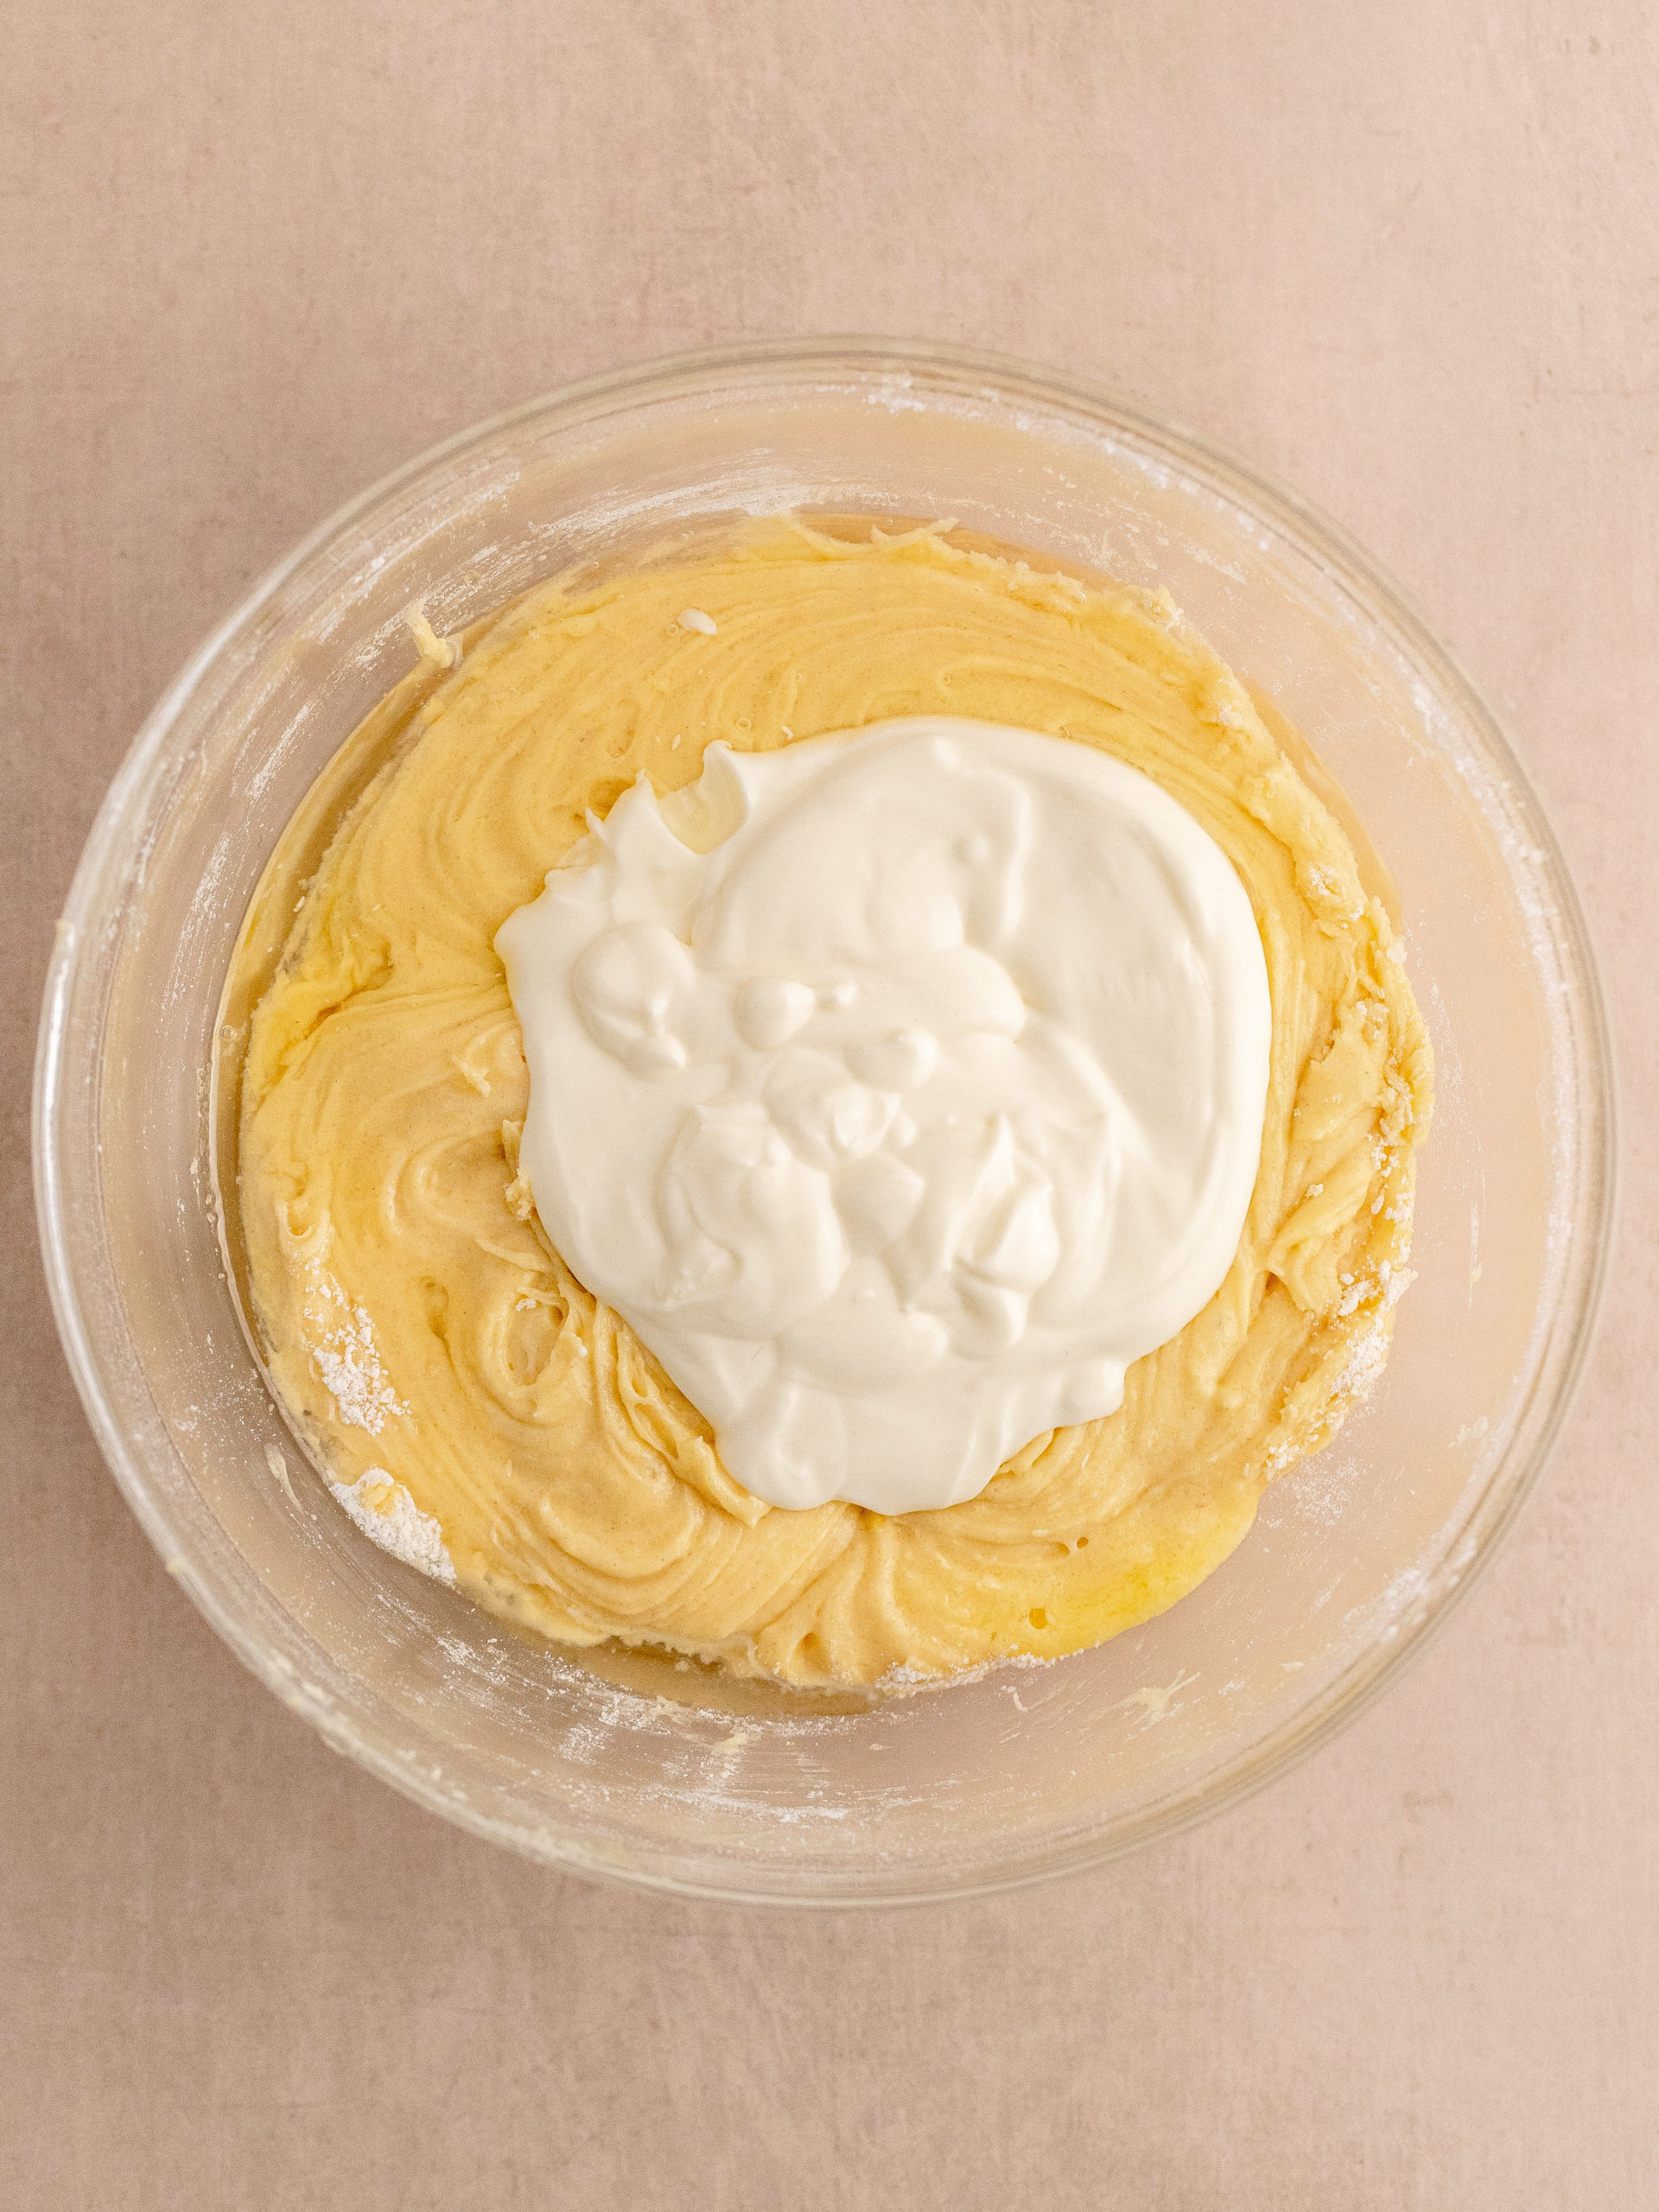 sour cream, oil and vanilla is added to the cake batter